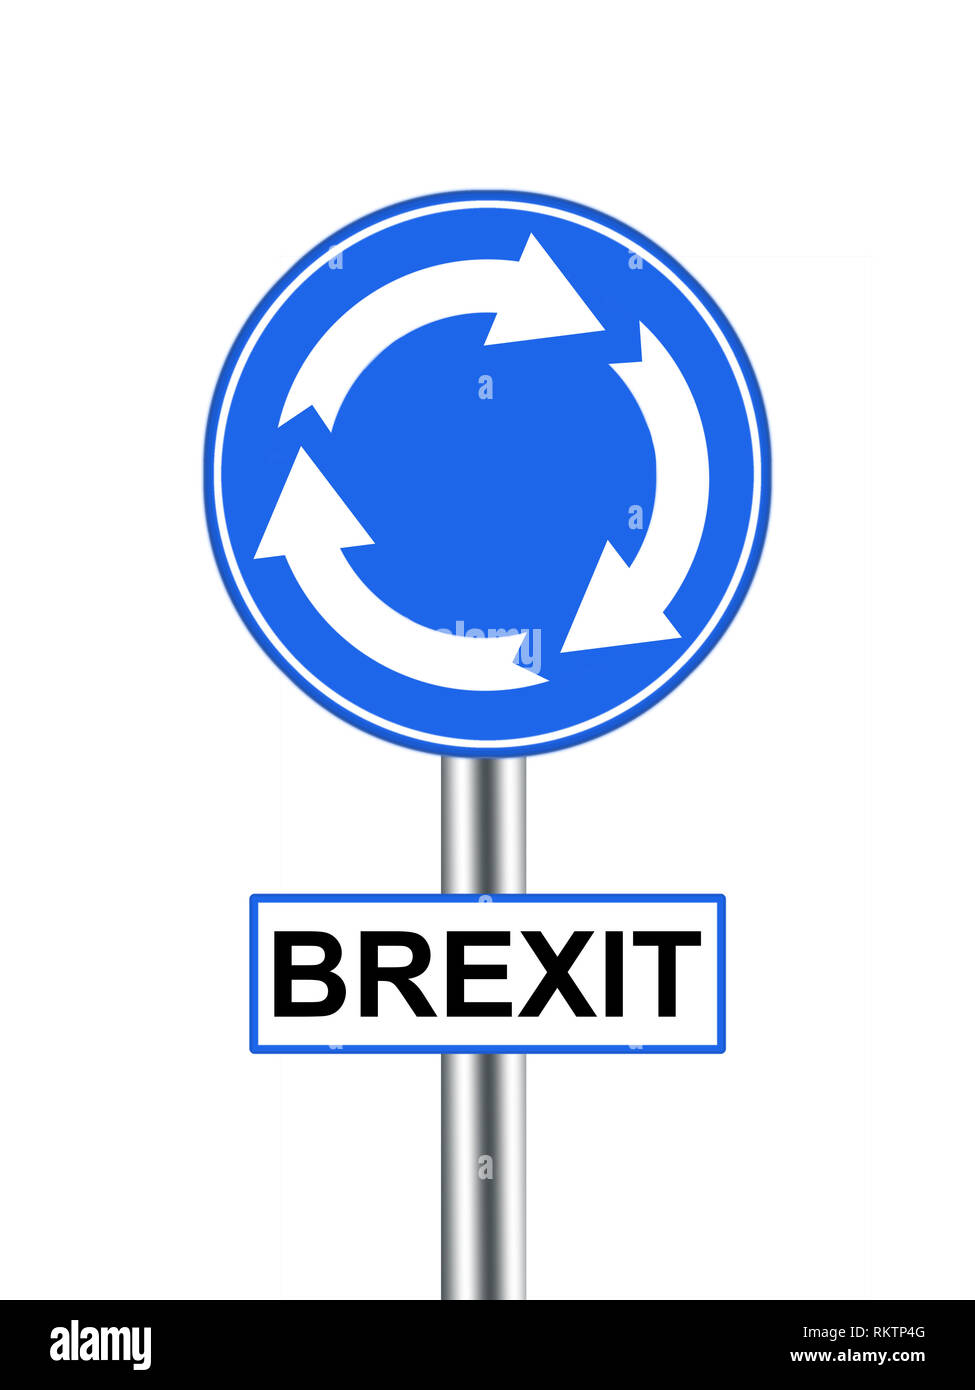 Brexit road sign roundabout. UK EU politics re leave the European Union. Isolated on white. Stock Photo